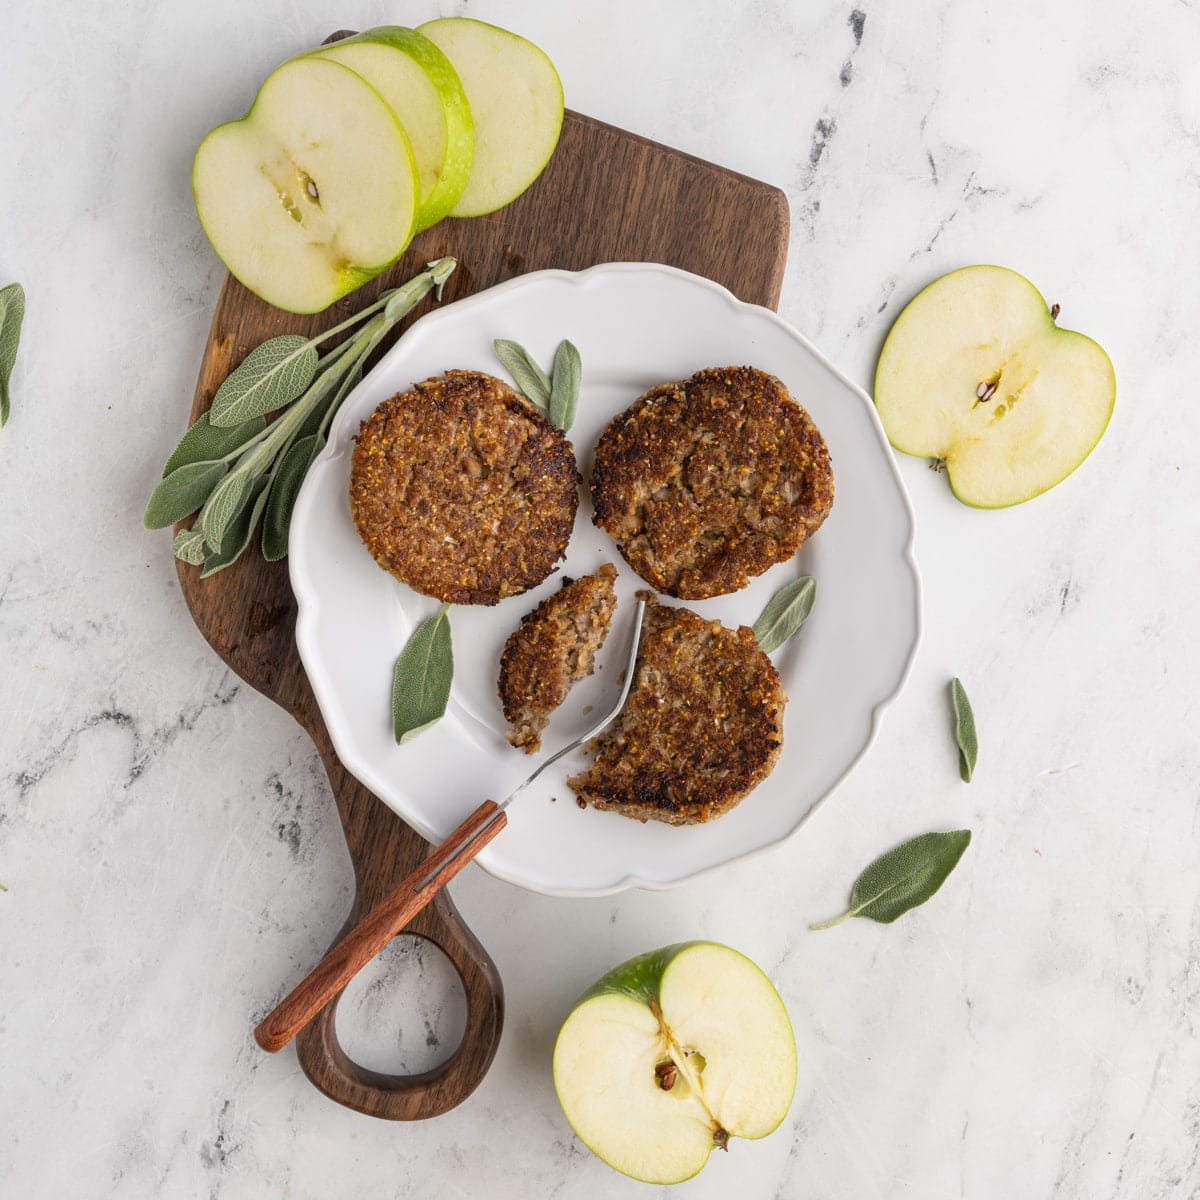 Vegan Sausage Patties for Breakfast surrounded by apples and sage